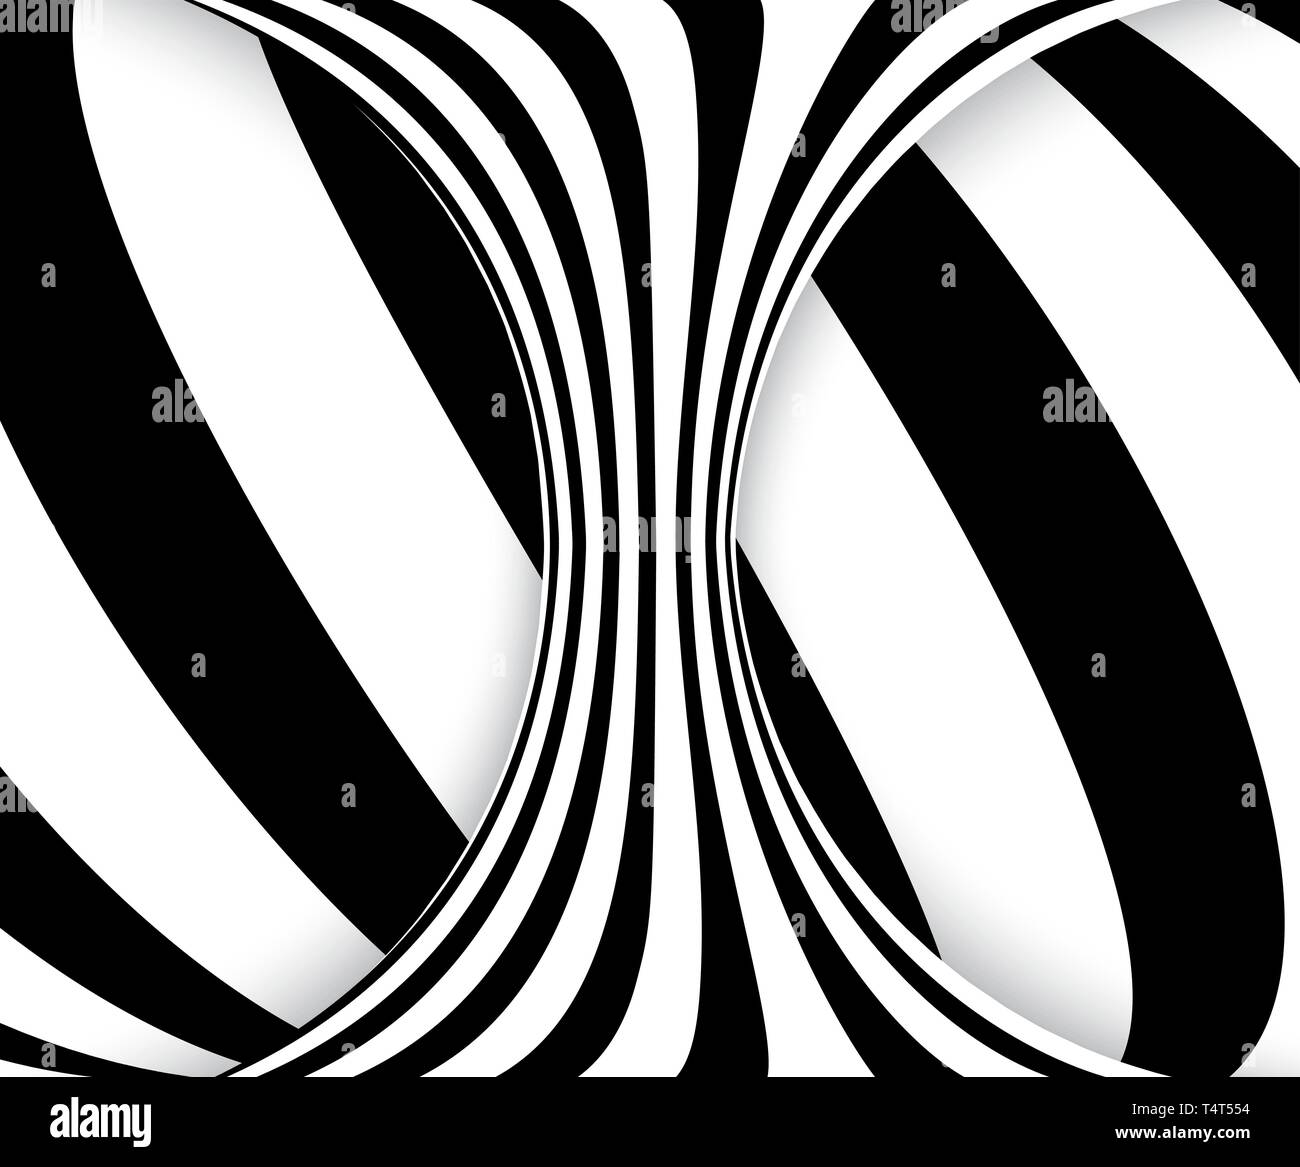 Black and white lines optical illusion. Abstract striped spiral vector background Stock Vector